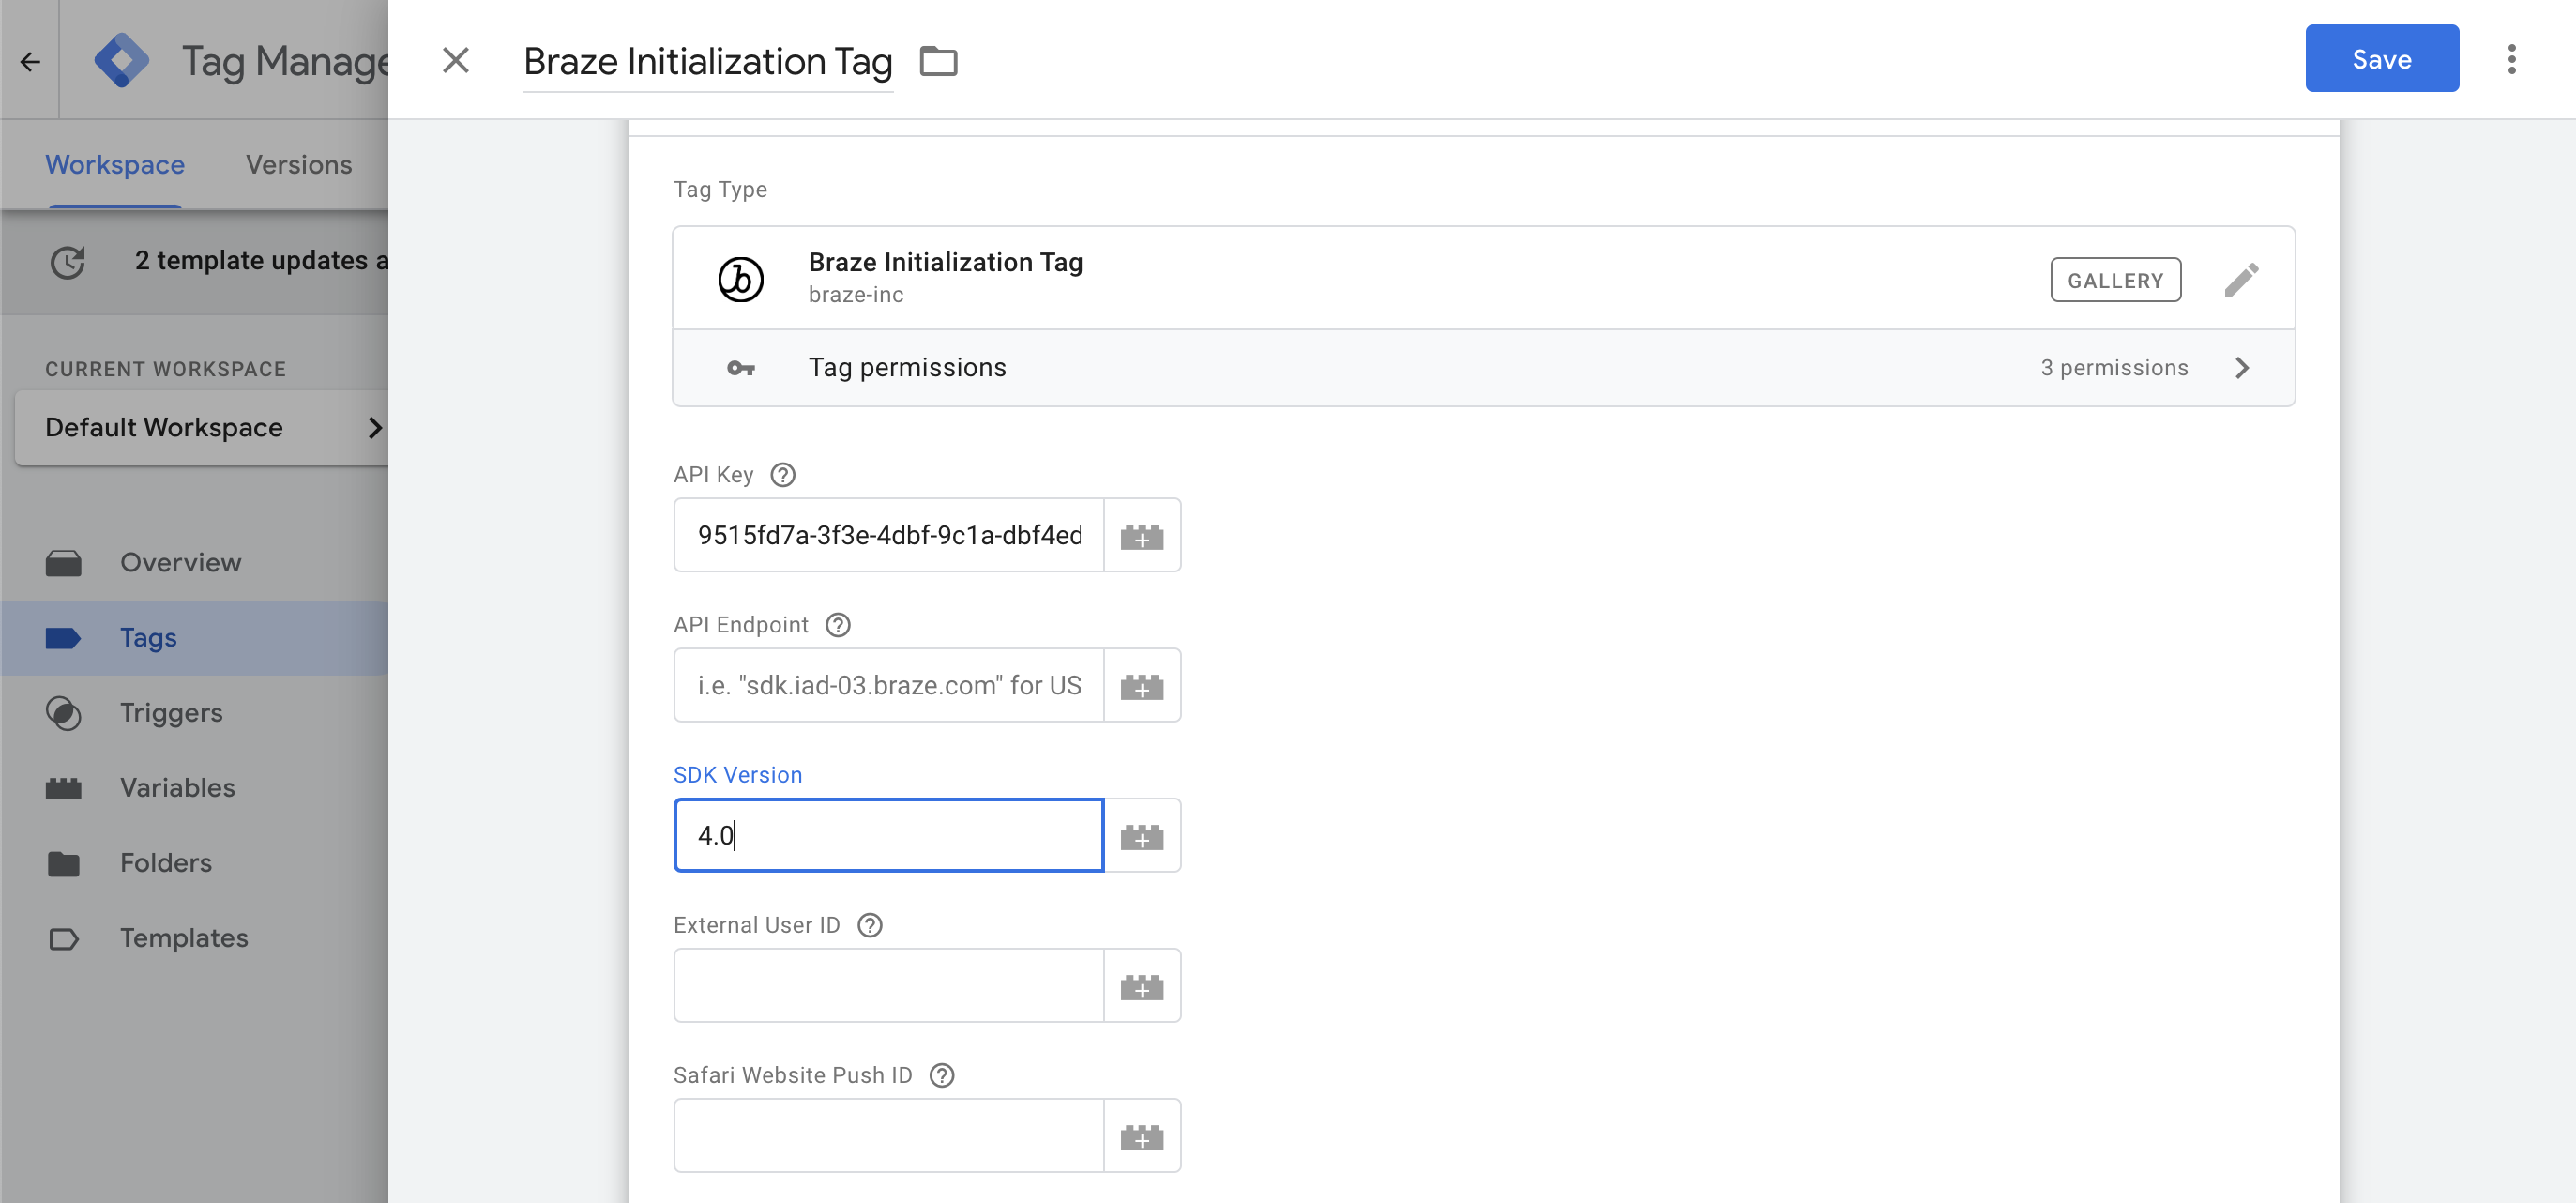 Braze Initialization Template with an input field to change the SDK Version